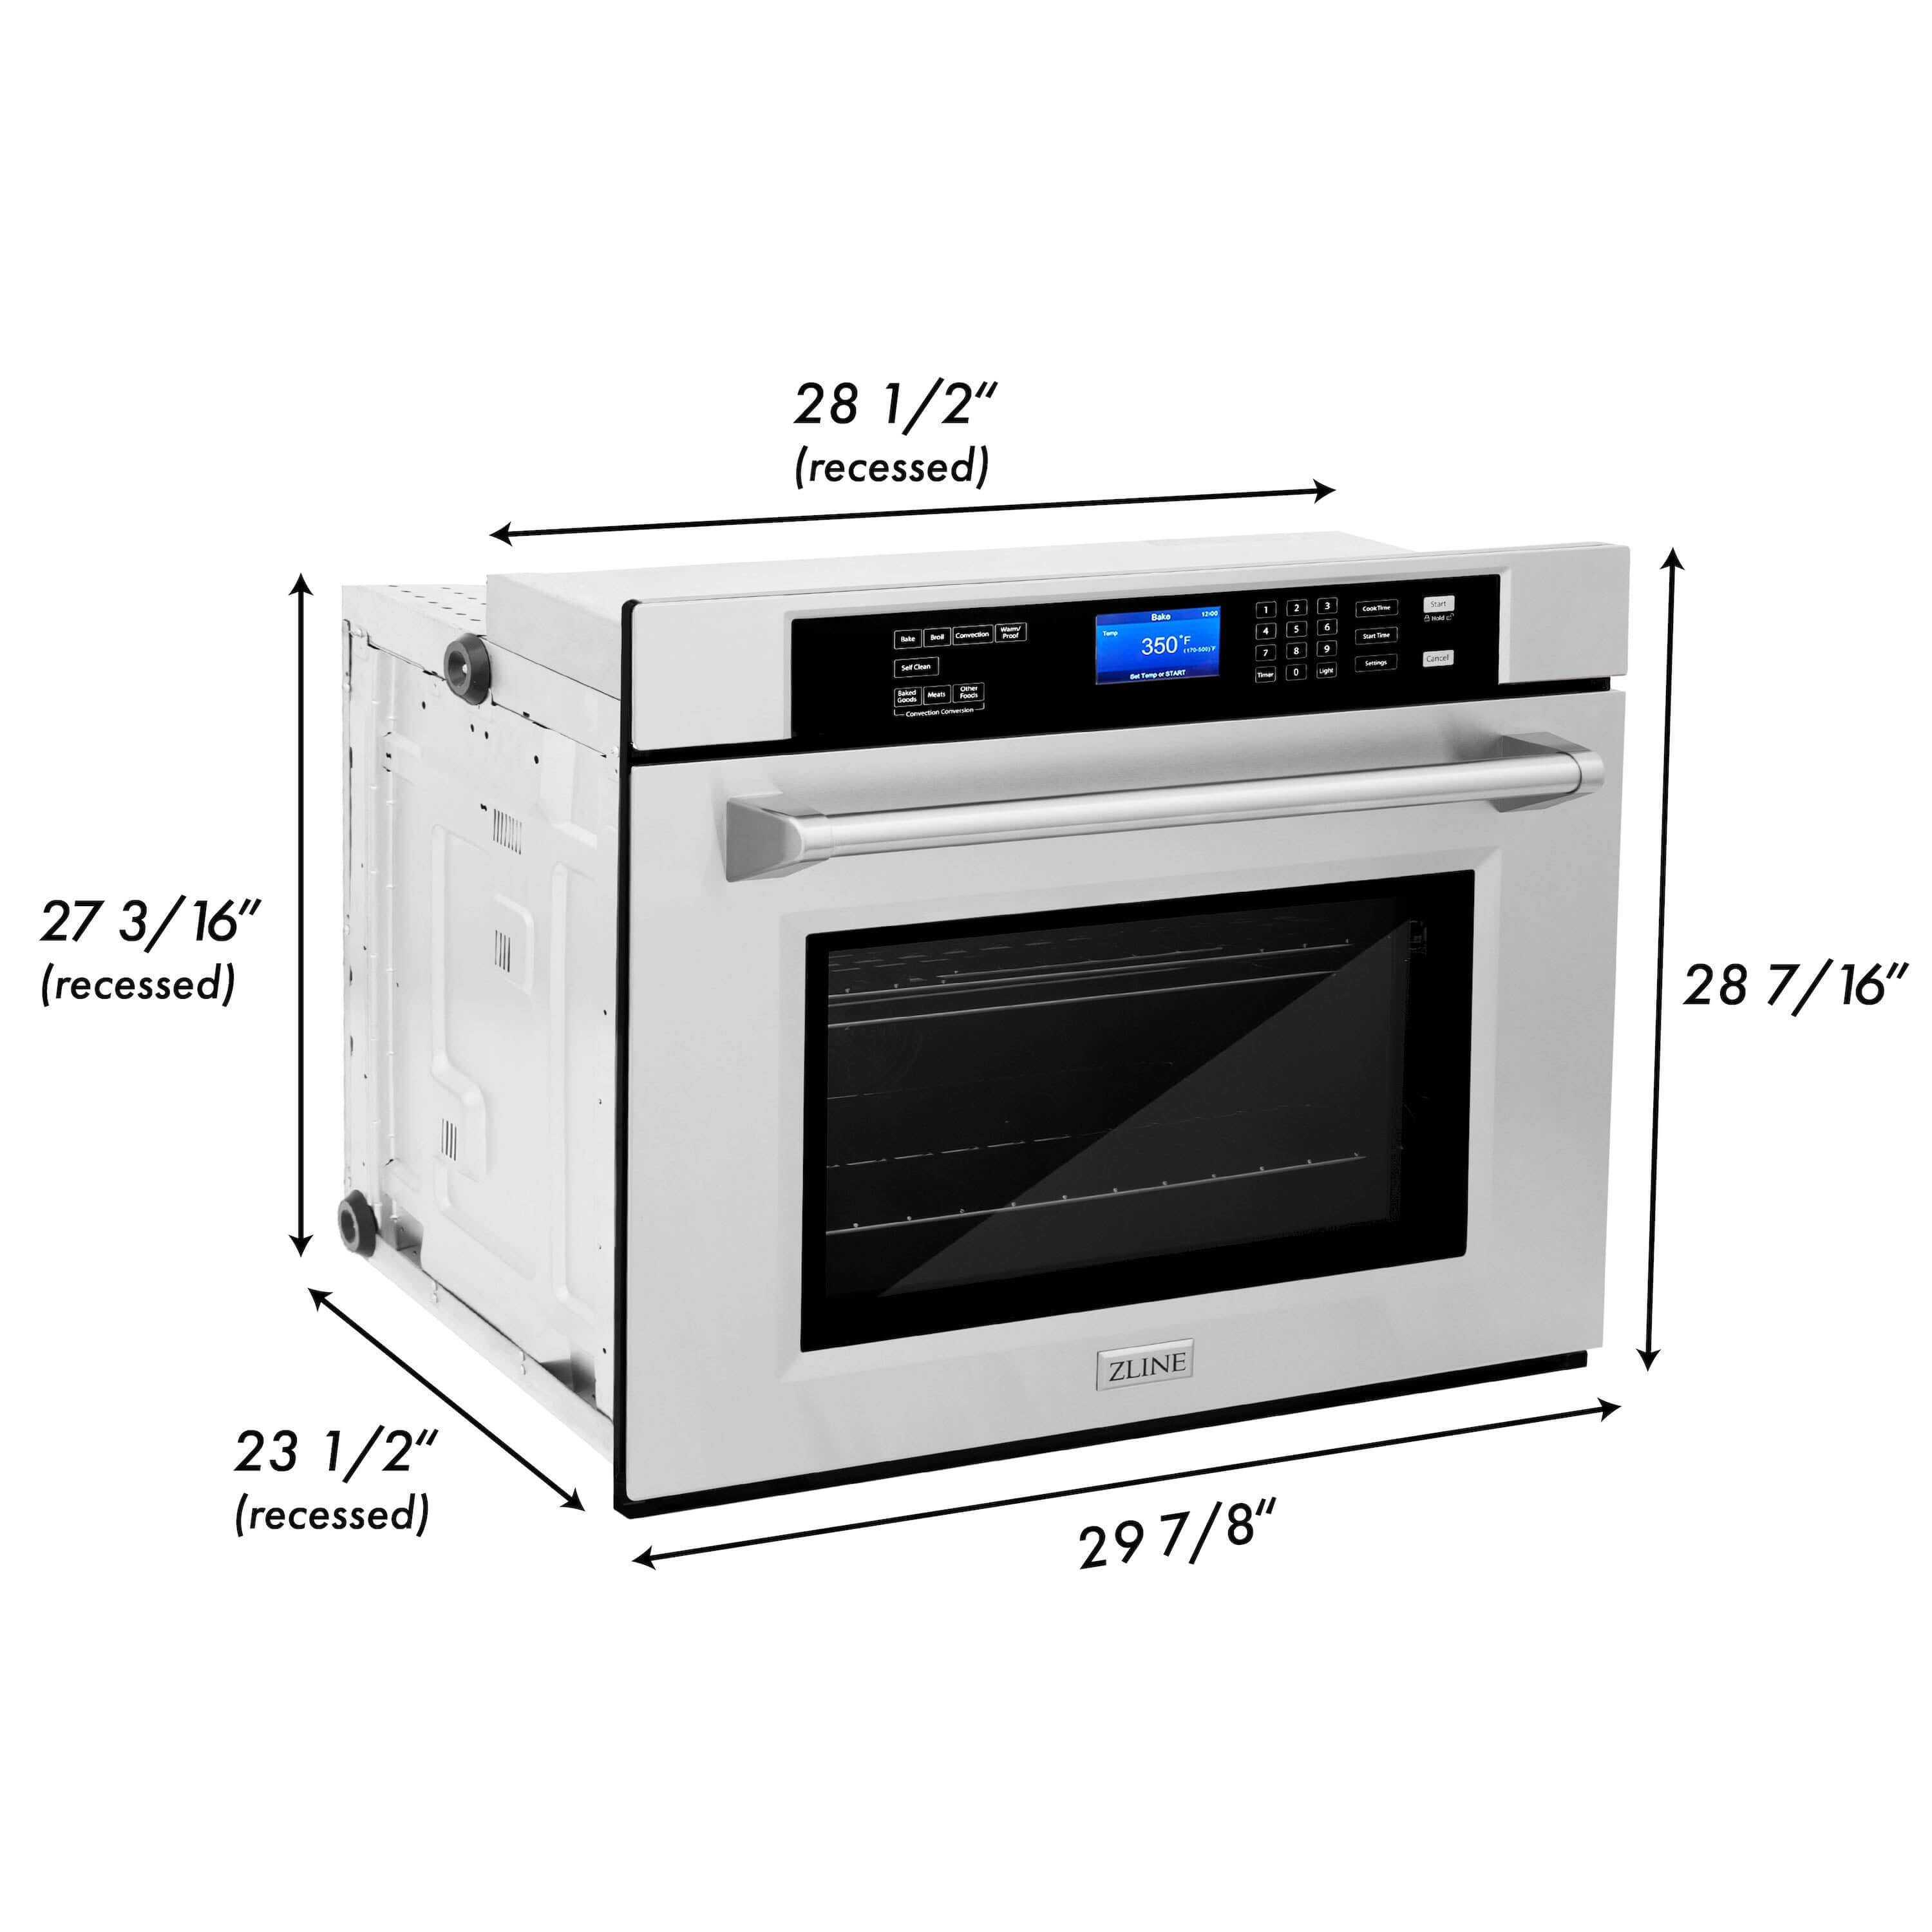 ZLINE Kitchen Package with Refrigeration, 30 in. Stainless Steel Rangetop, 30 in. Range Hood, 30 in. Single Wall Oven and 24 in. Tall Tub Dishwasher (5KPR-RTRH30-AWSDWV) dimensional diagram with measurements.